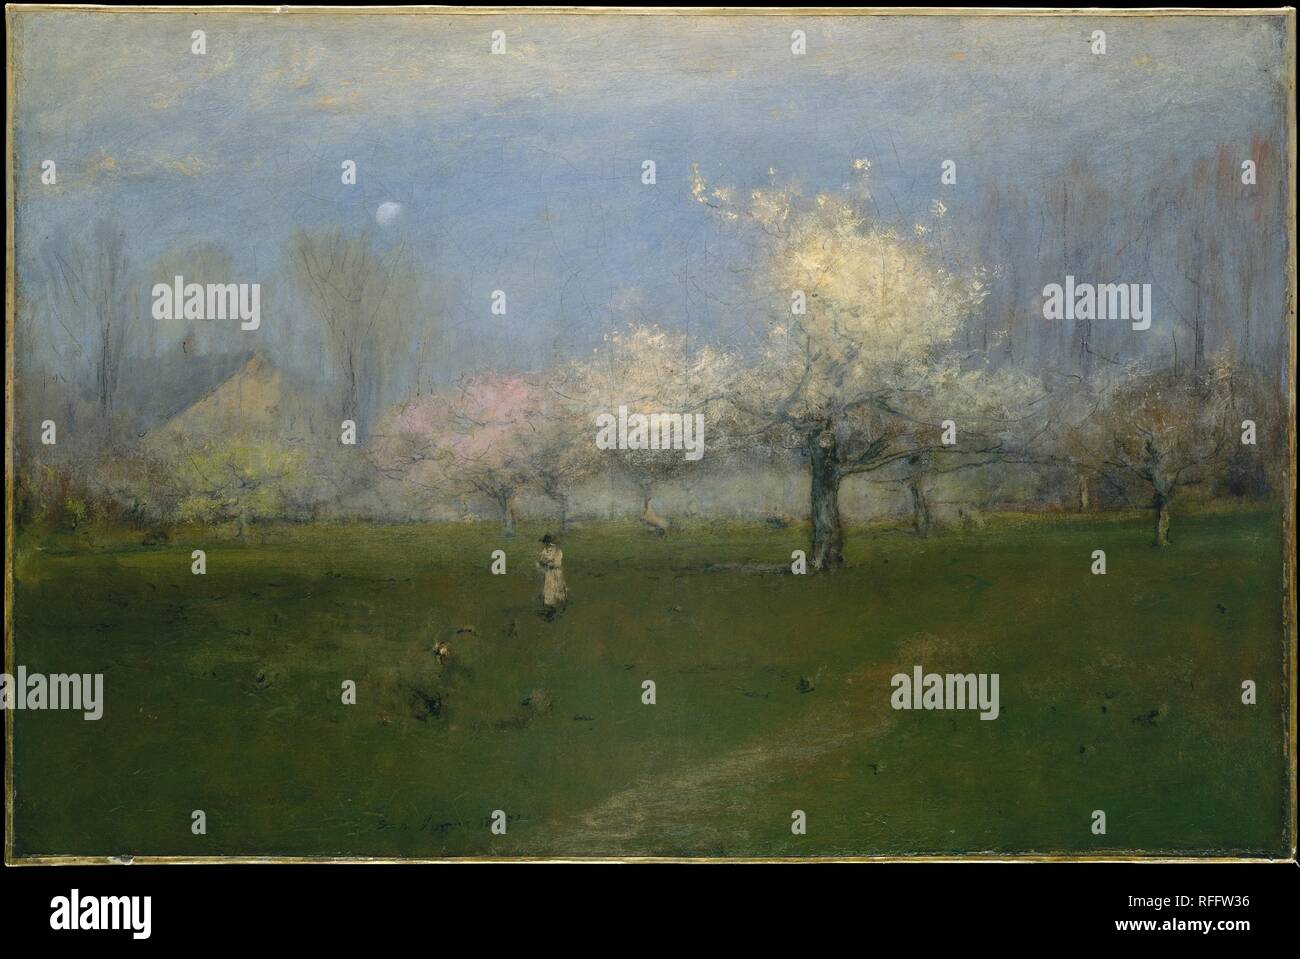 Spring Blossoms, Montclair, New Jersey. Artist: George Inness (American, Newburgh, New York 1825-1894 Bridge of Allan, Scotland). Dimensions: 29 x 45 1/4 in. (73.7 x 114.9 cm). Date: ca. 1891.  George Inness, who began his career painting in the Hudson River School mode, embraced a variety of styles throughout his long career. Exposure to the work of French Barbizon artists as well as to the pantheistic philosophy of Swedish scientist and theologian Emanuel Swedenborg led him to develop a more personal approach to painting. Inness's later landscapes, such as this work, grew increasingly expres Stock Photo